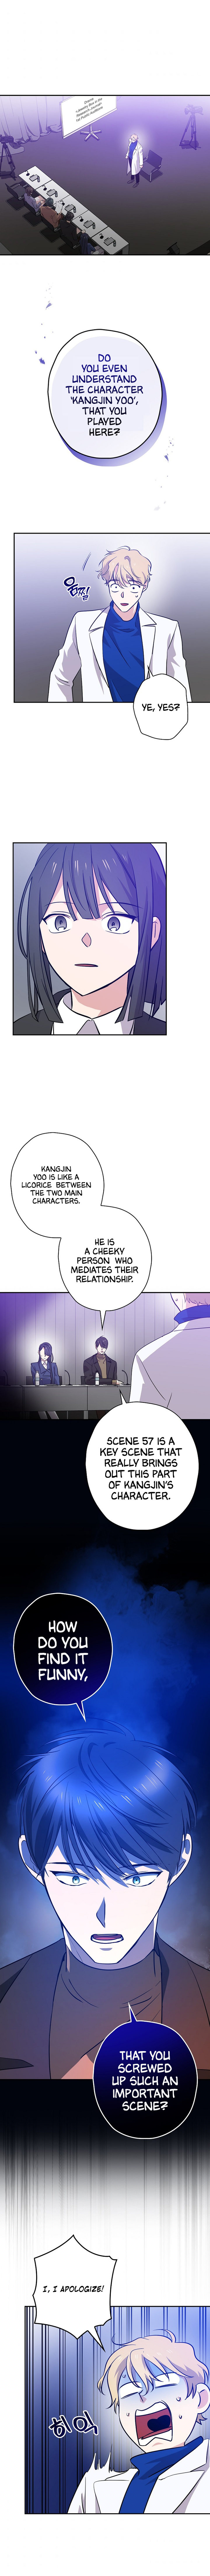 King of Drama - Chapter 46 Page 3